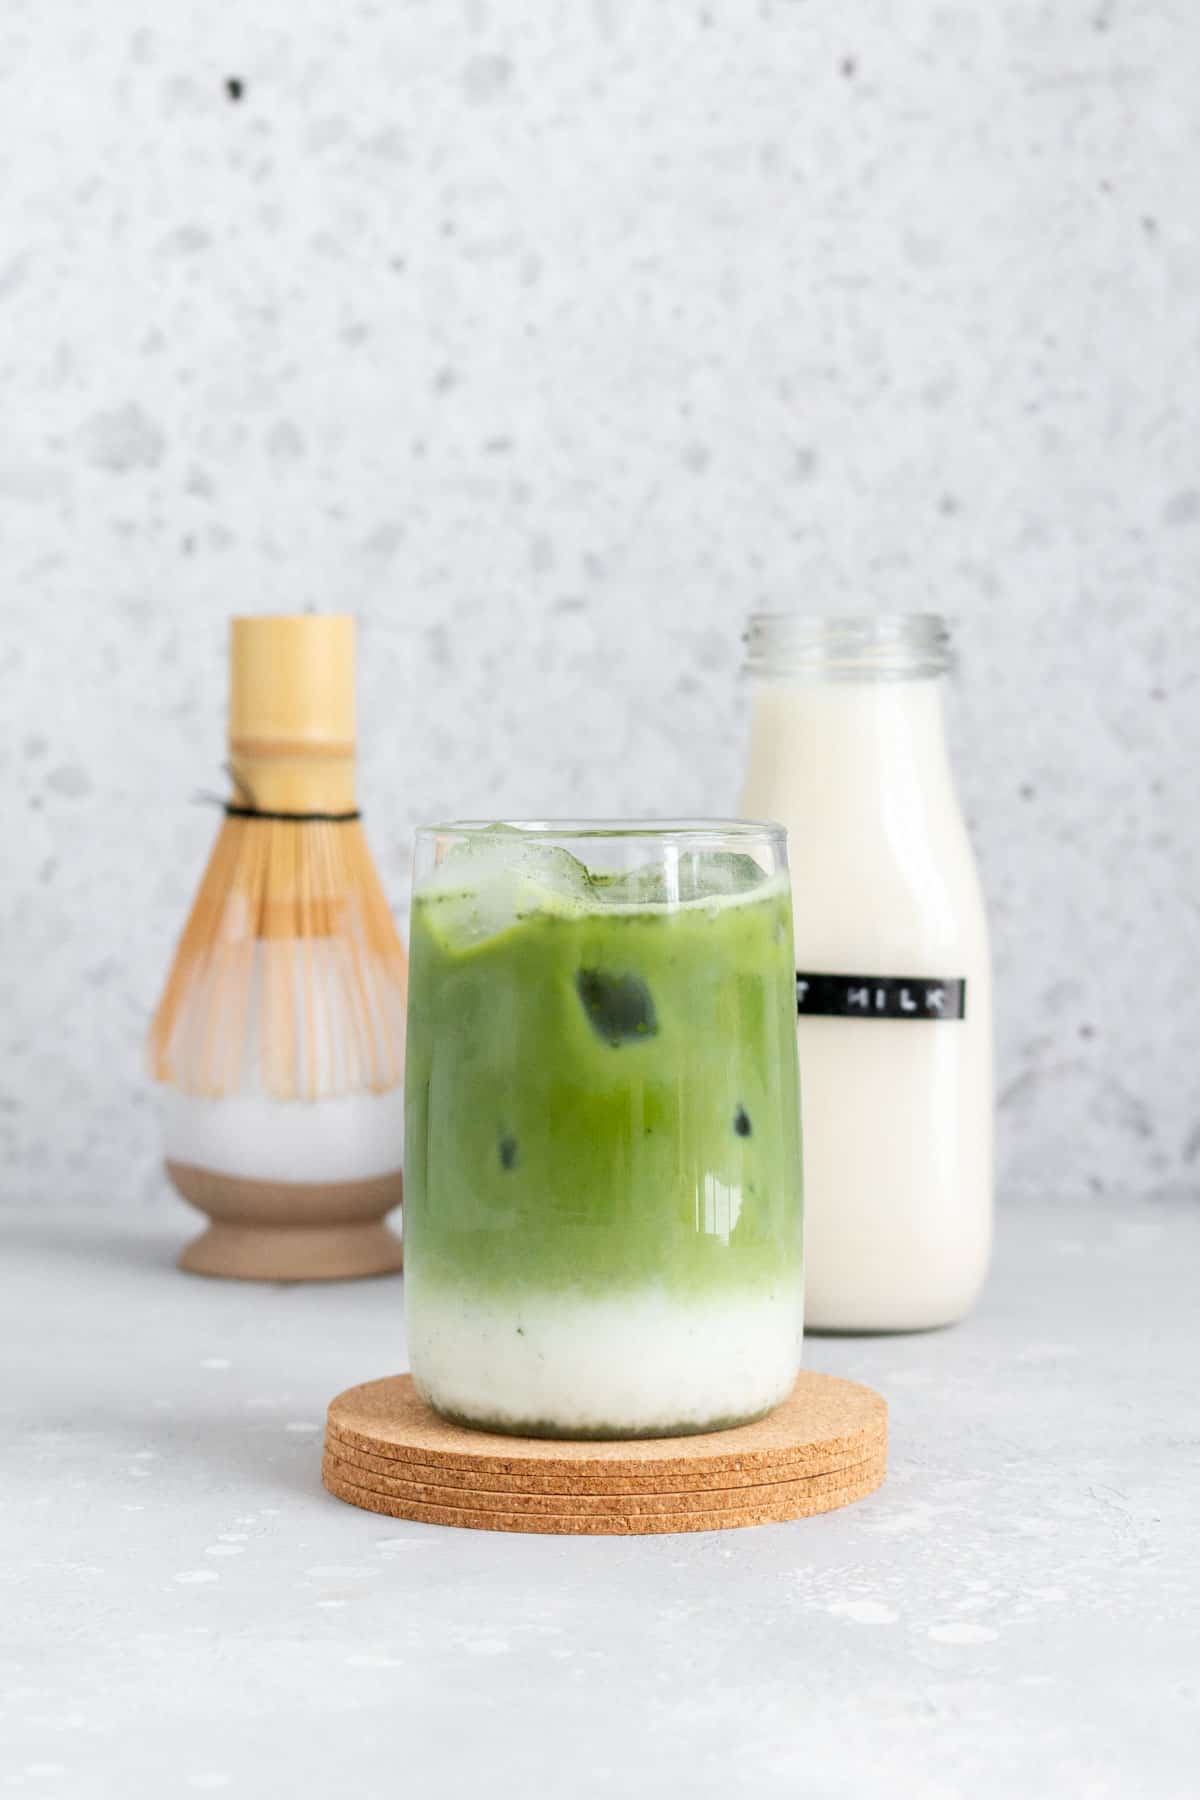 A glass of oat milk matcha latte with the matcha and milk separated.